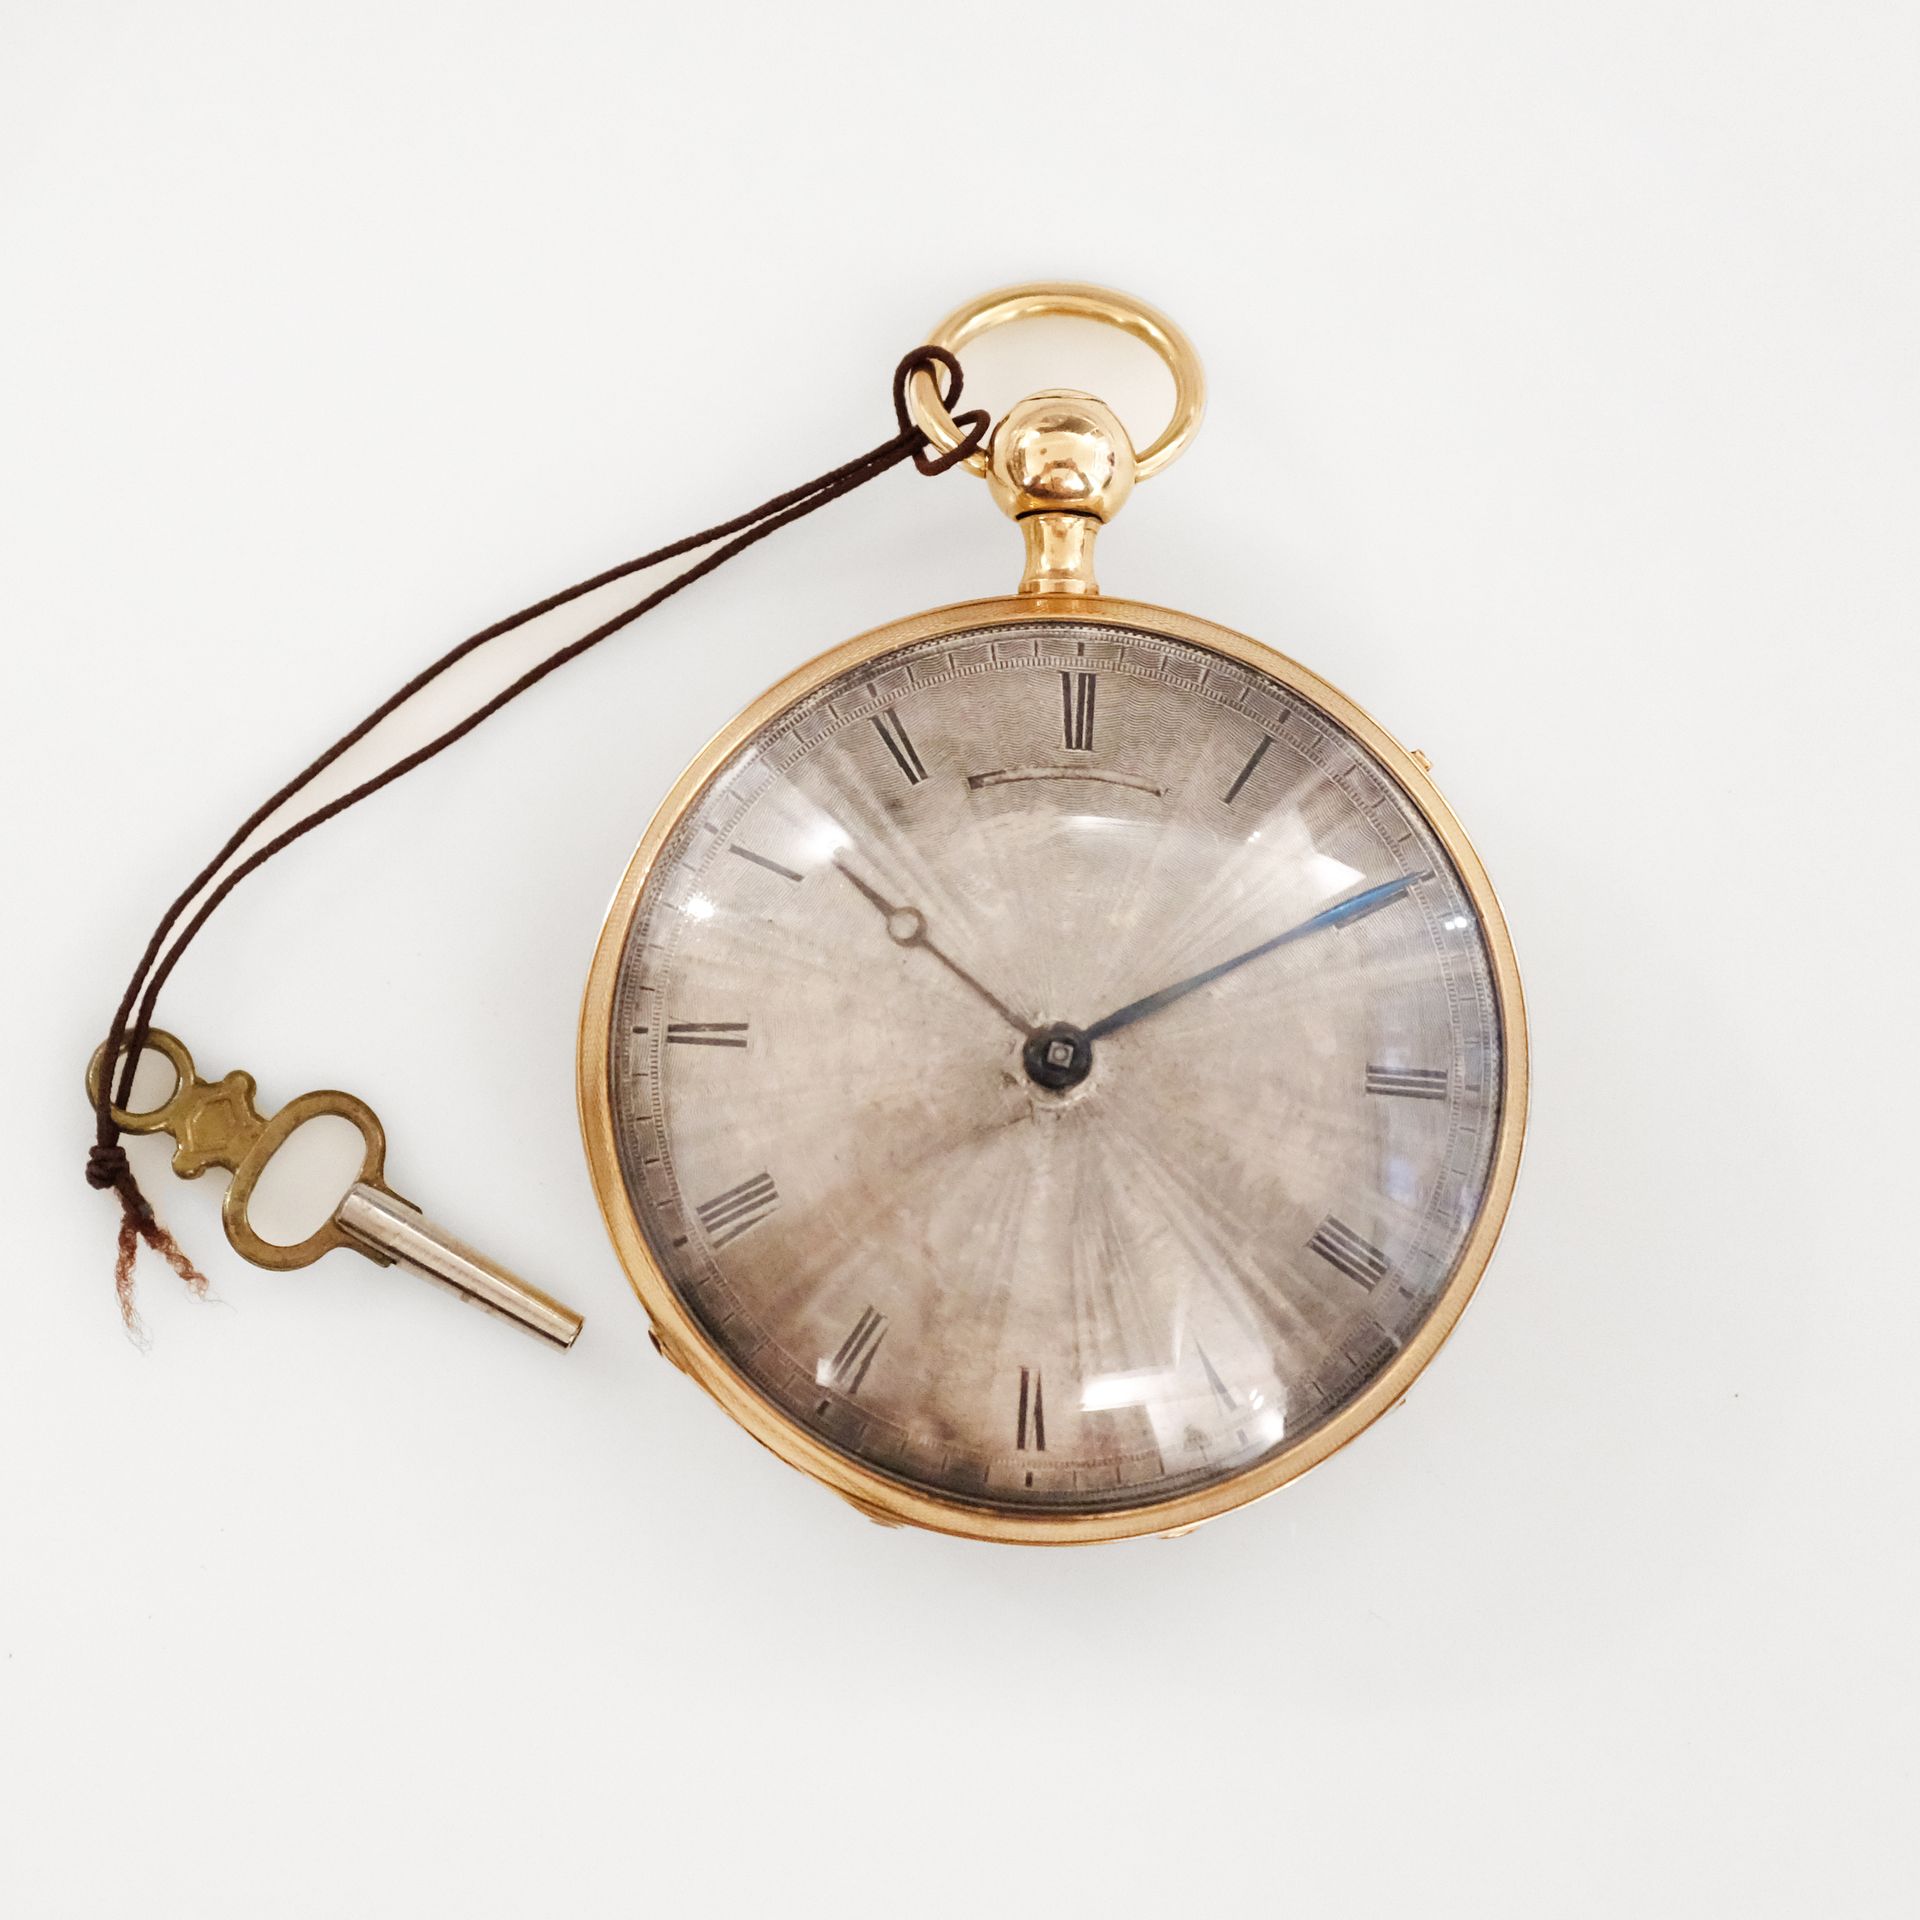 ANONYME No. 27740
18k (750) yellow gold pocket watch with striking, silver dial,&hellip;